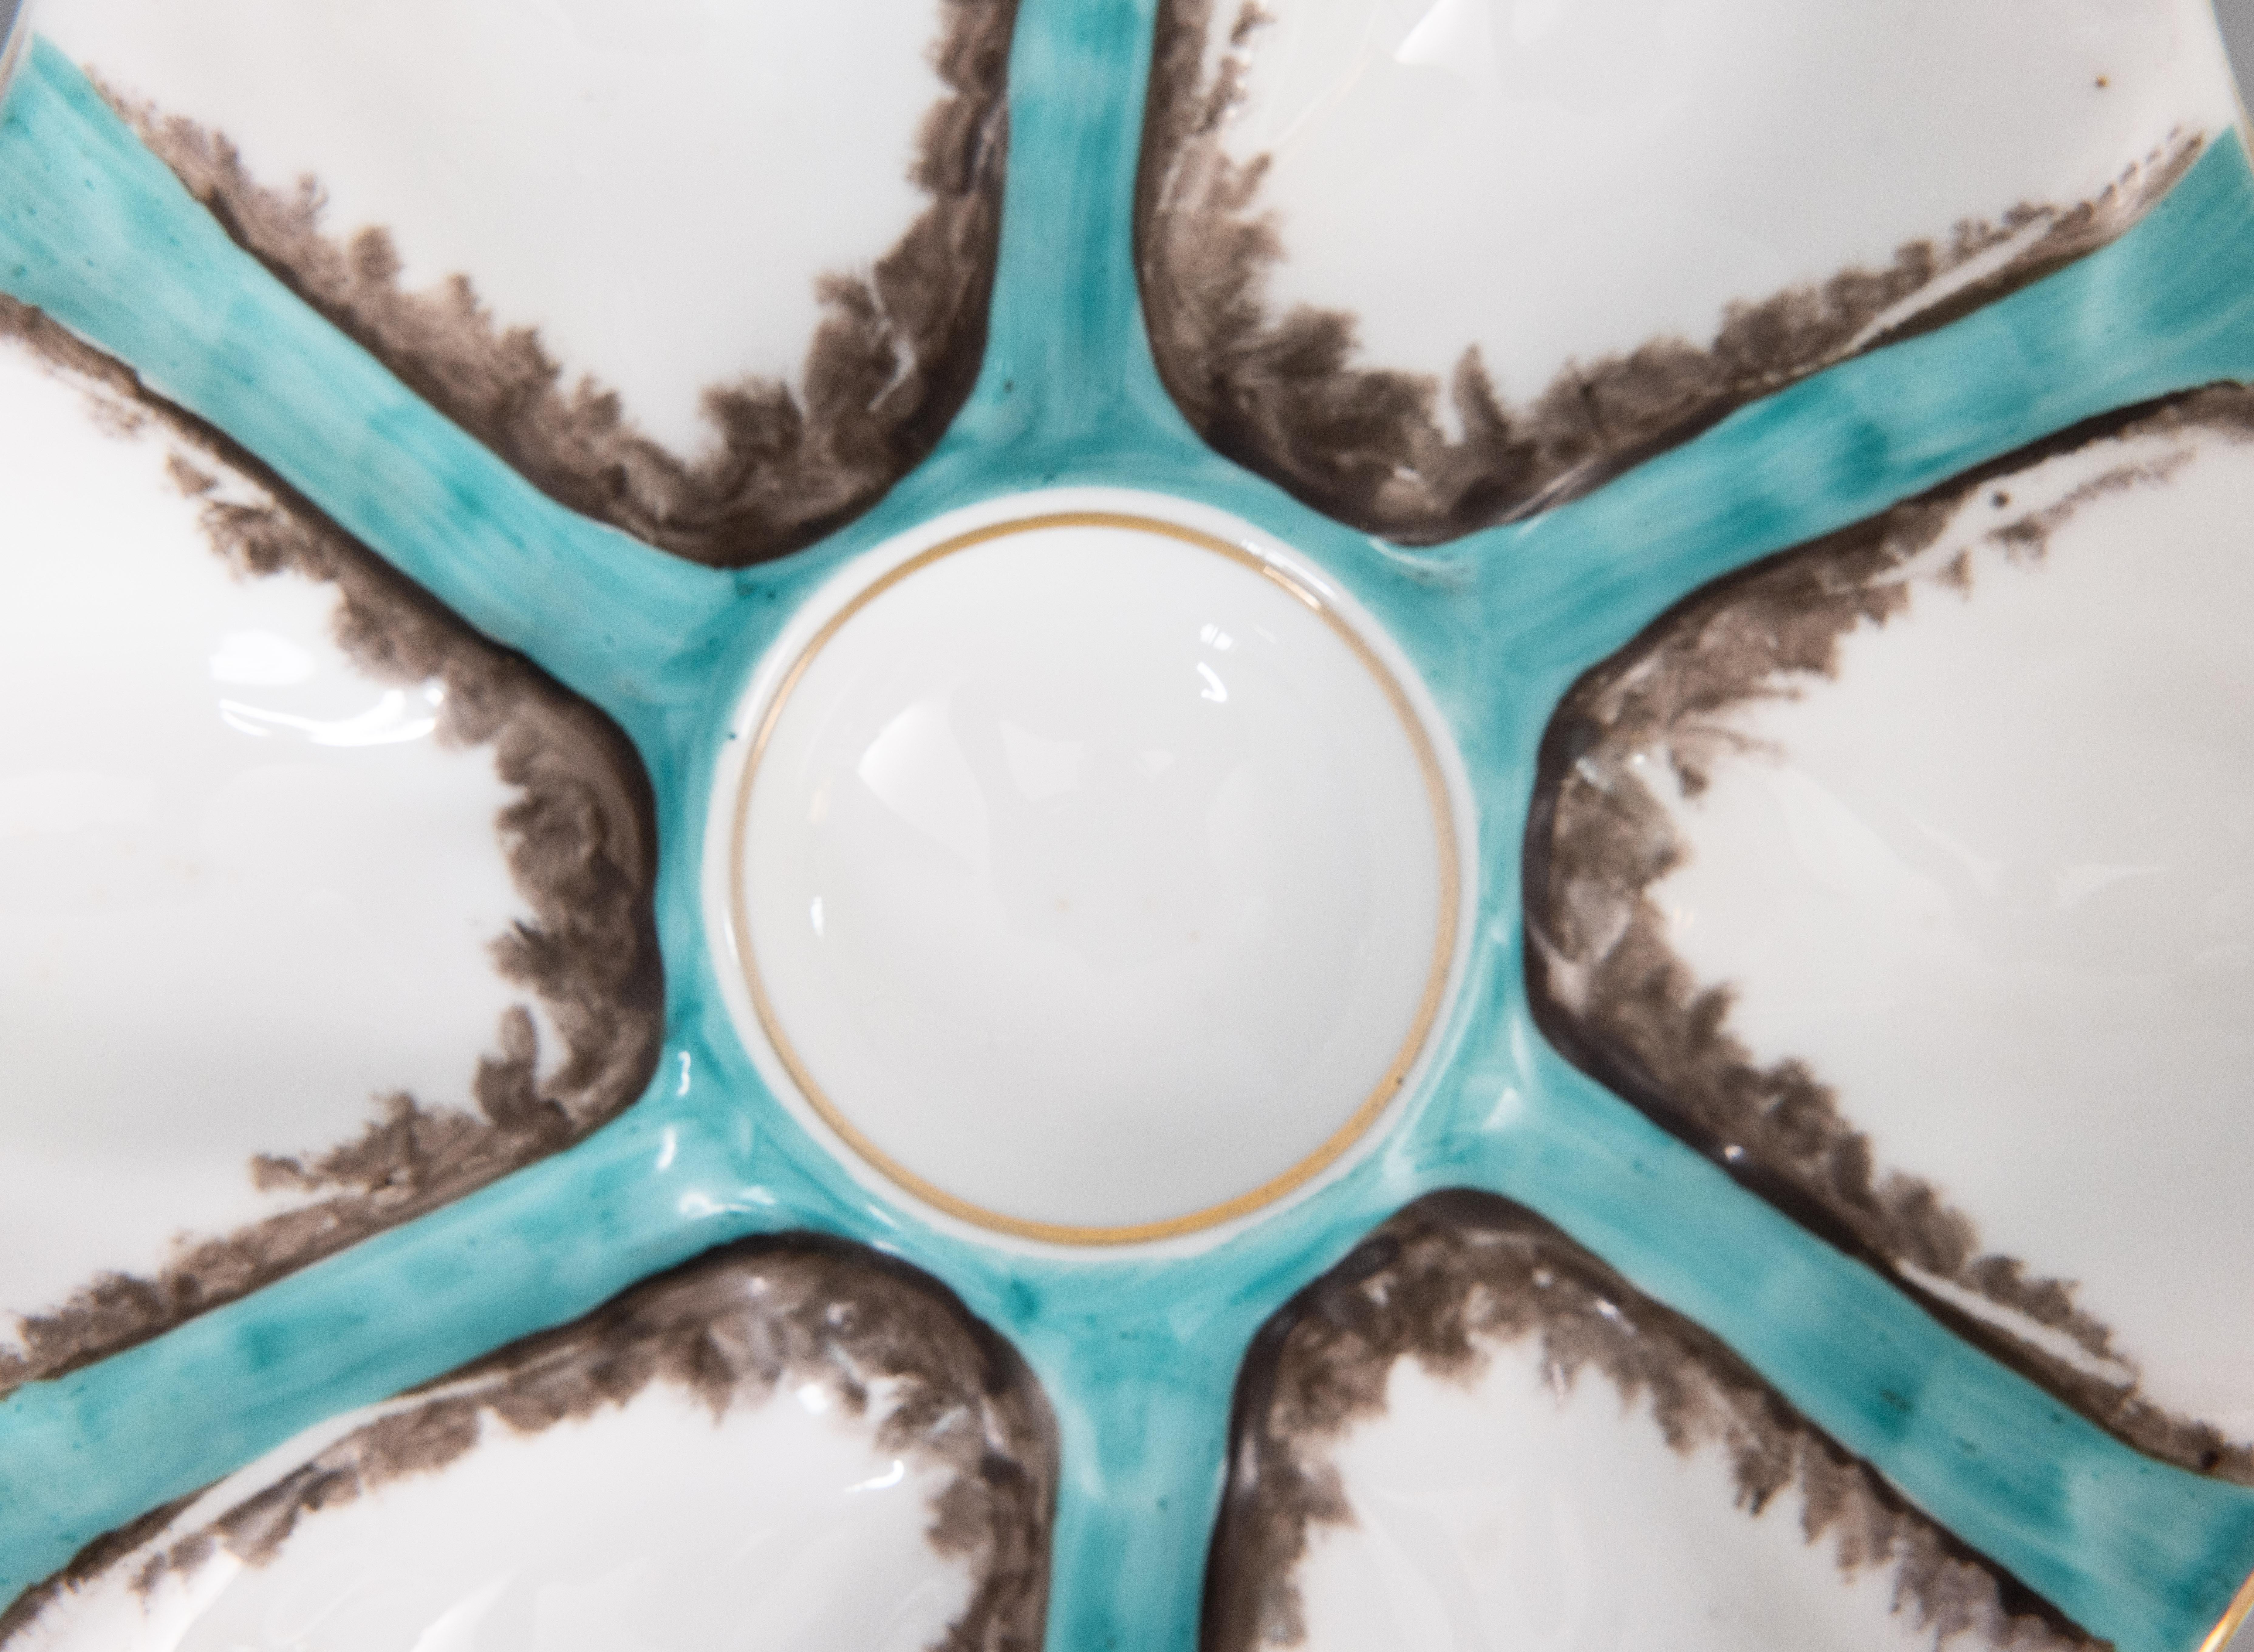 A gorgeous antique French porcelain oyster plate attributed to Limoges, circa 1900. This fine quality oyster plate has six wells and is hand painted in a beautiful blue green teal / turquoise color with gilt details. It displays beautifully and